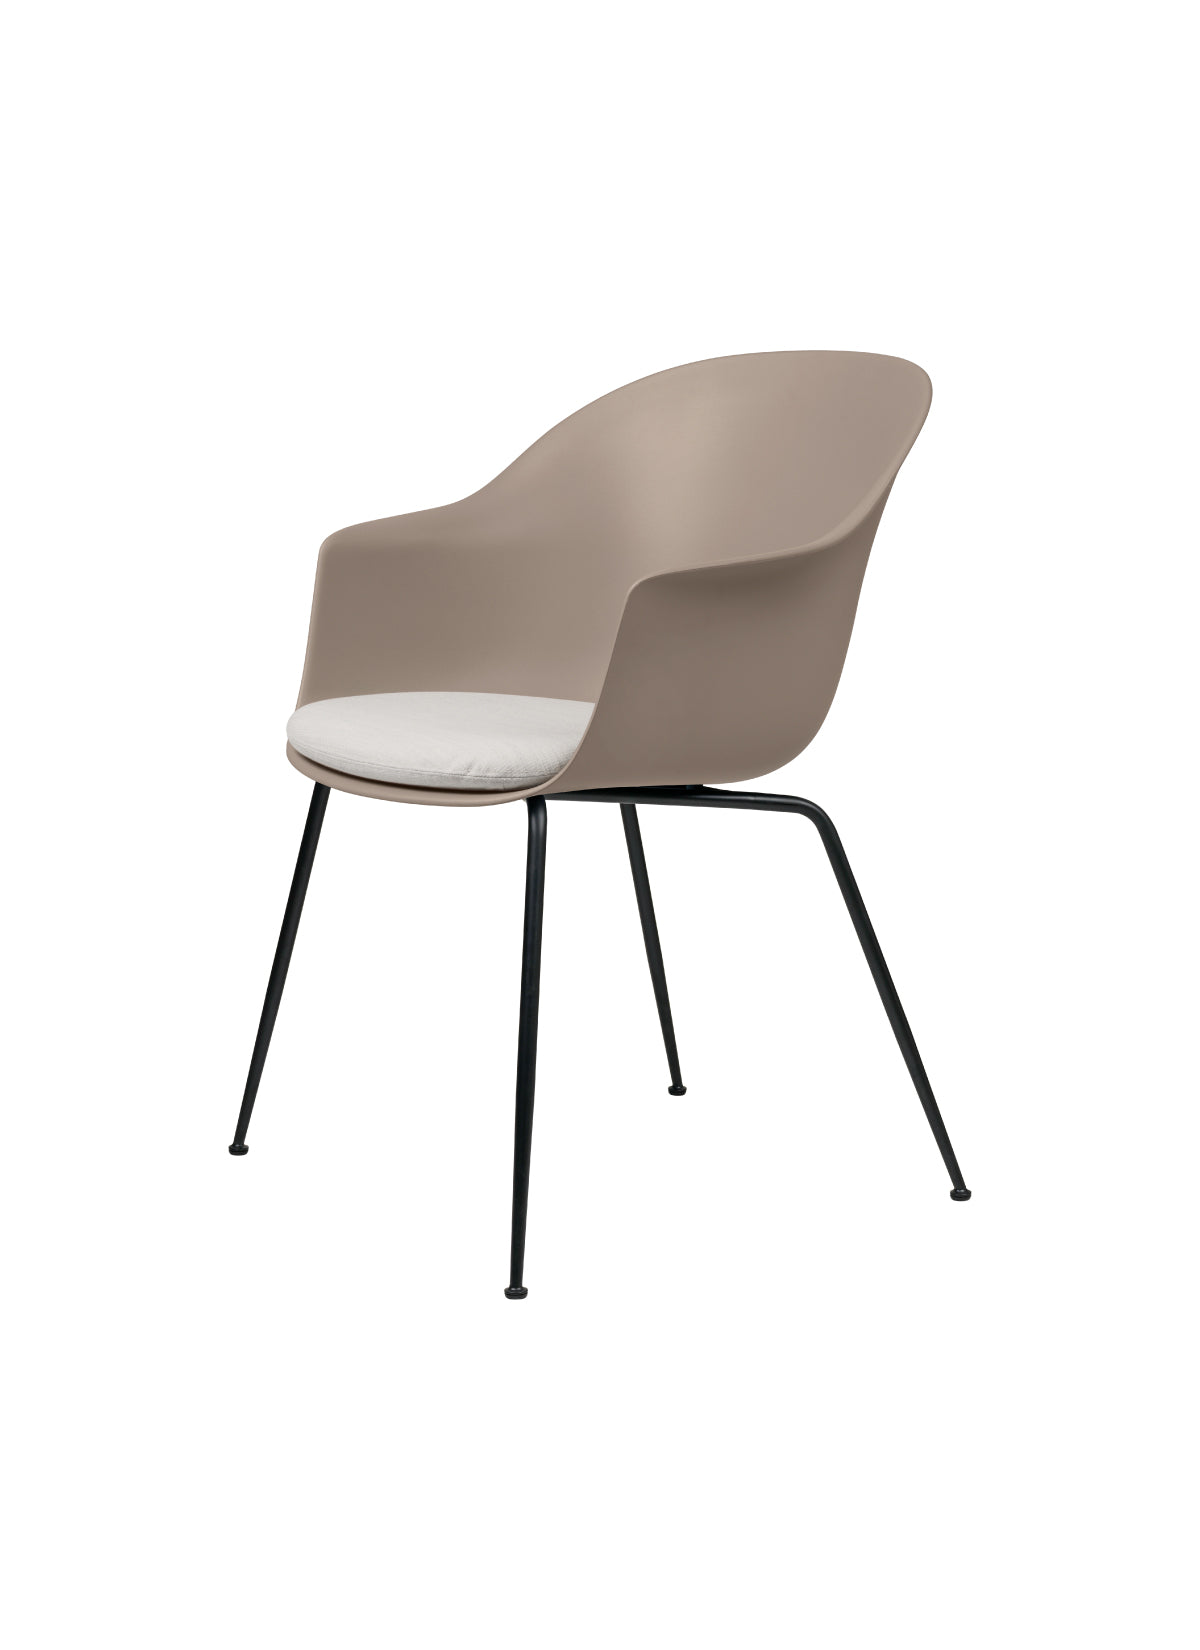 Bat Dining Chair - Conic Base - With Cushion by Gubi